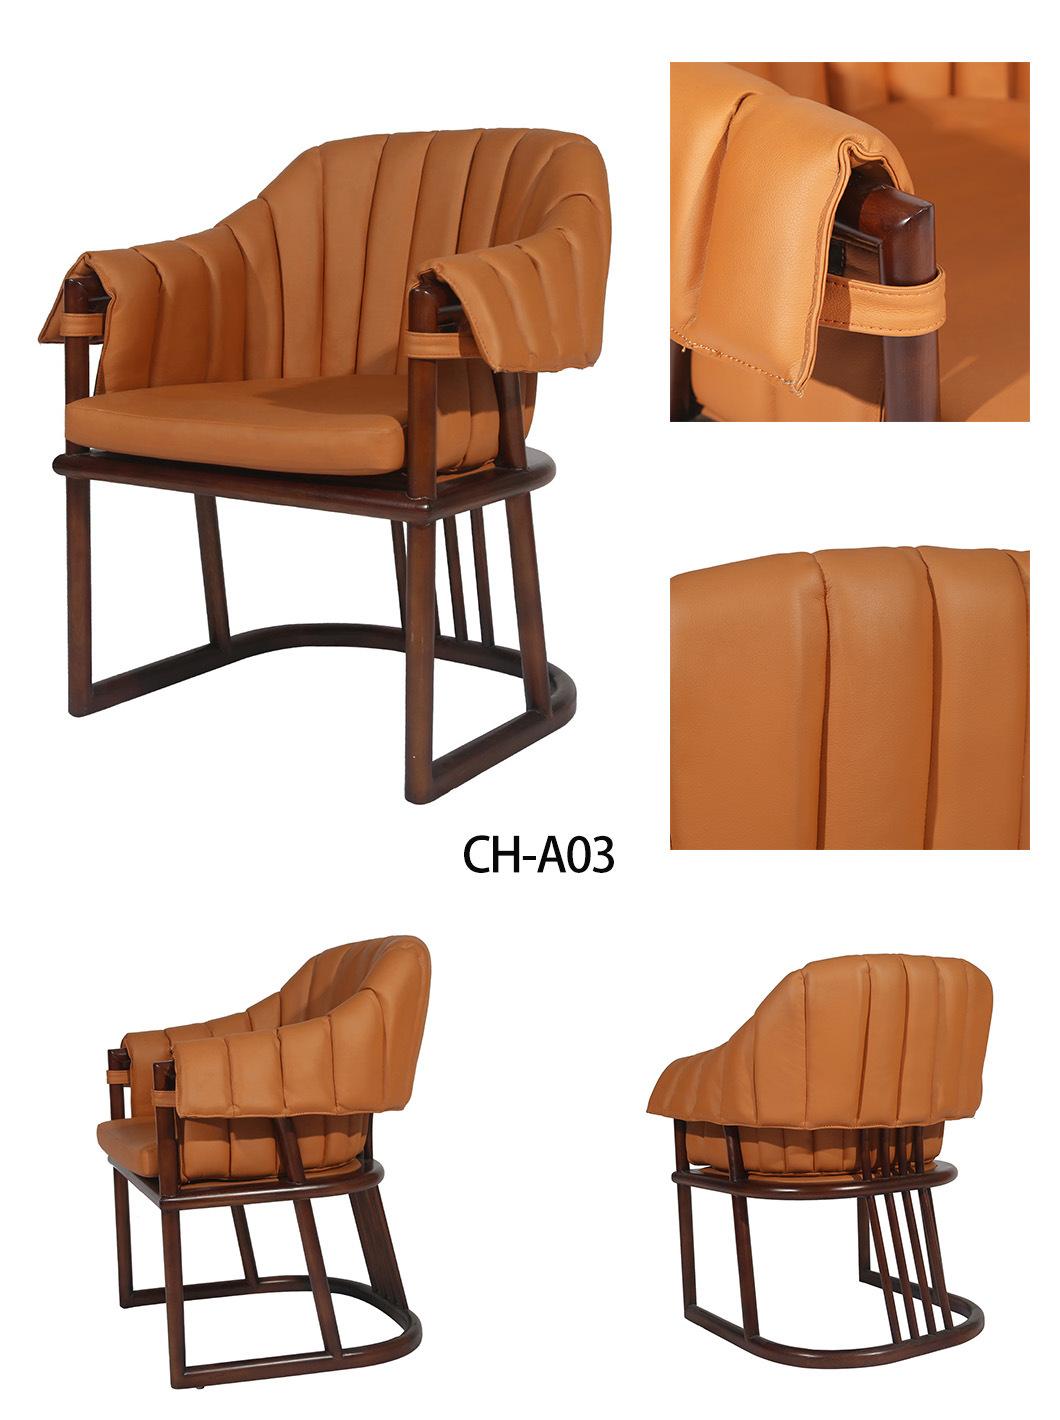 Commercial Furniture Modern Furniture Wooden Furniture Solid Wood Office Restaurant Dining Chair Hotel Chair